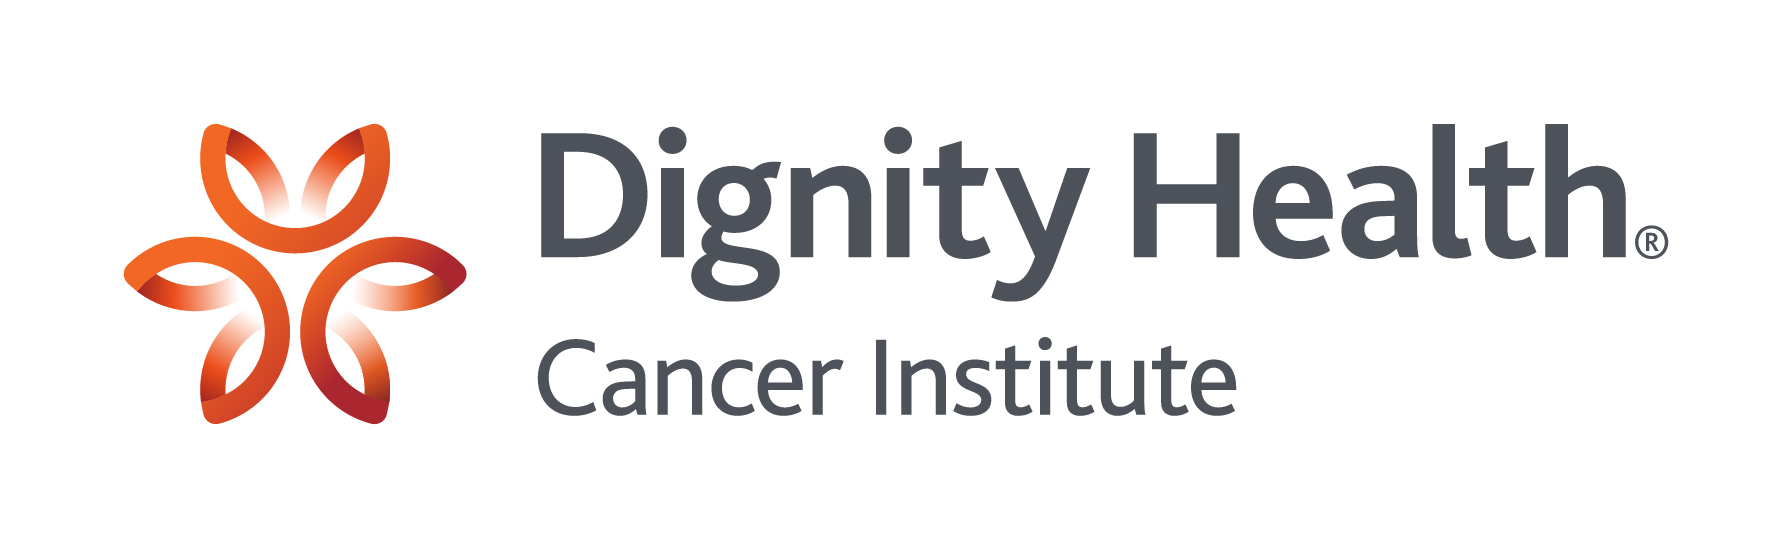 Dignity Health - Cancer Institute at St. Joseph's Hospital and Medical Center